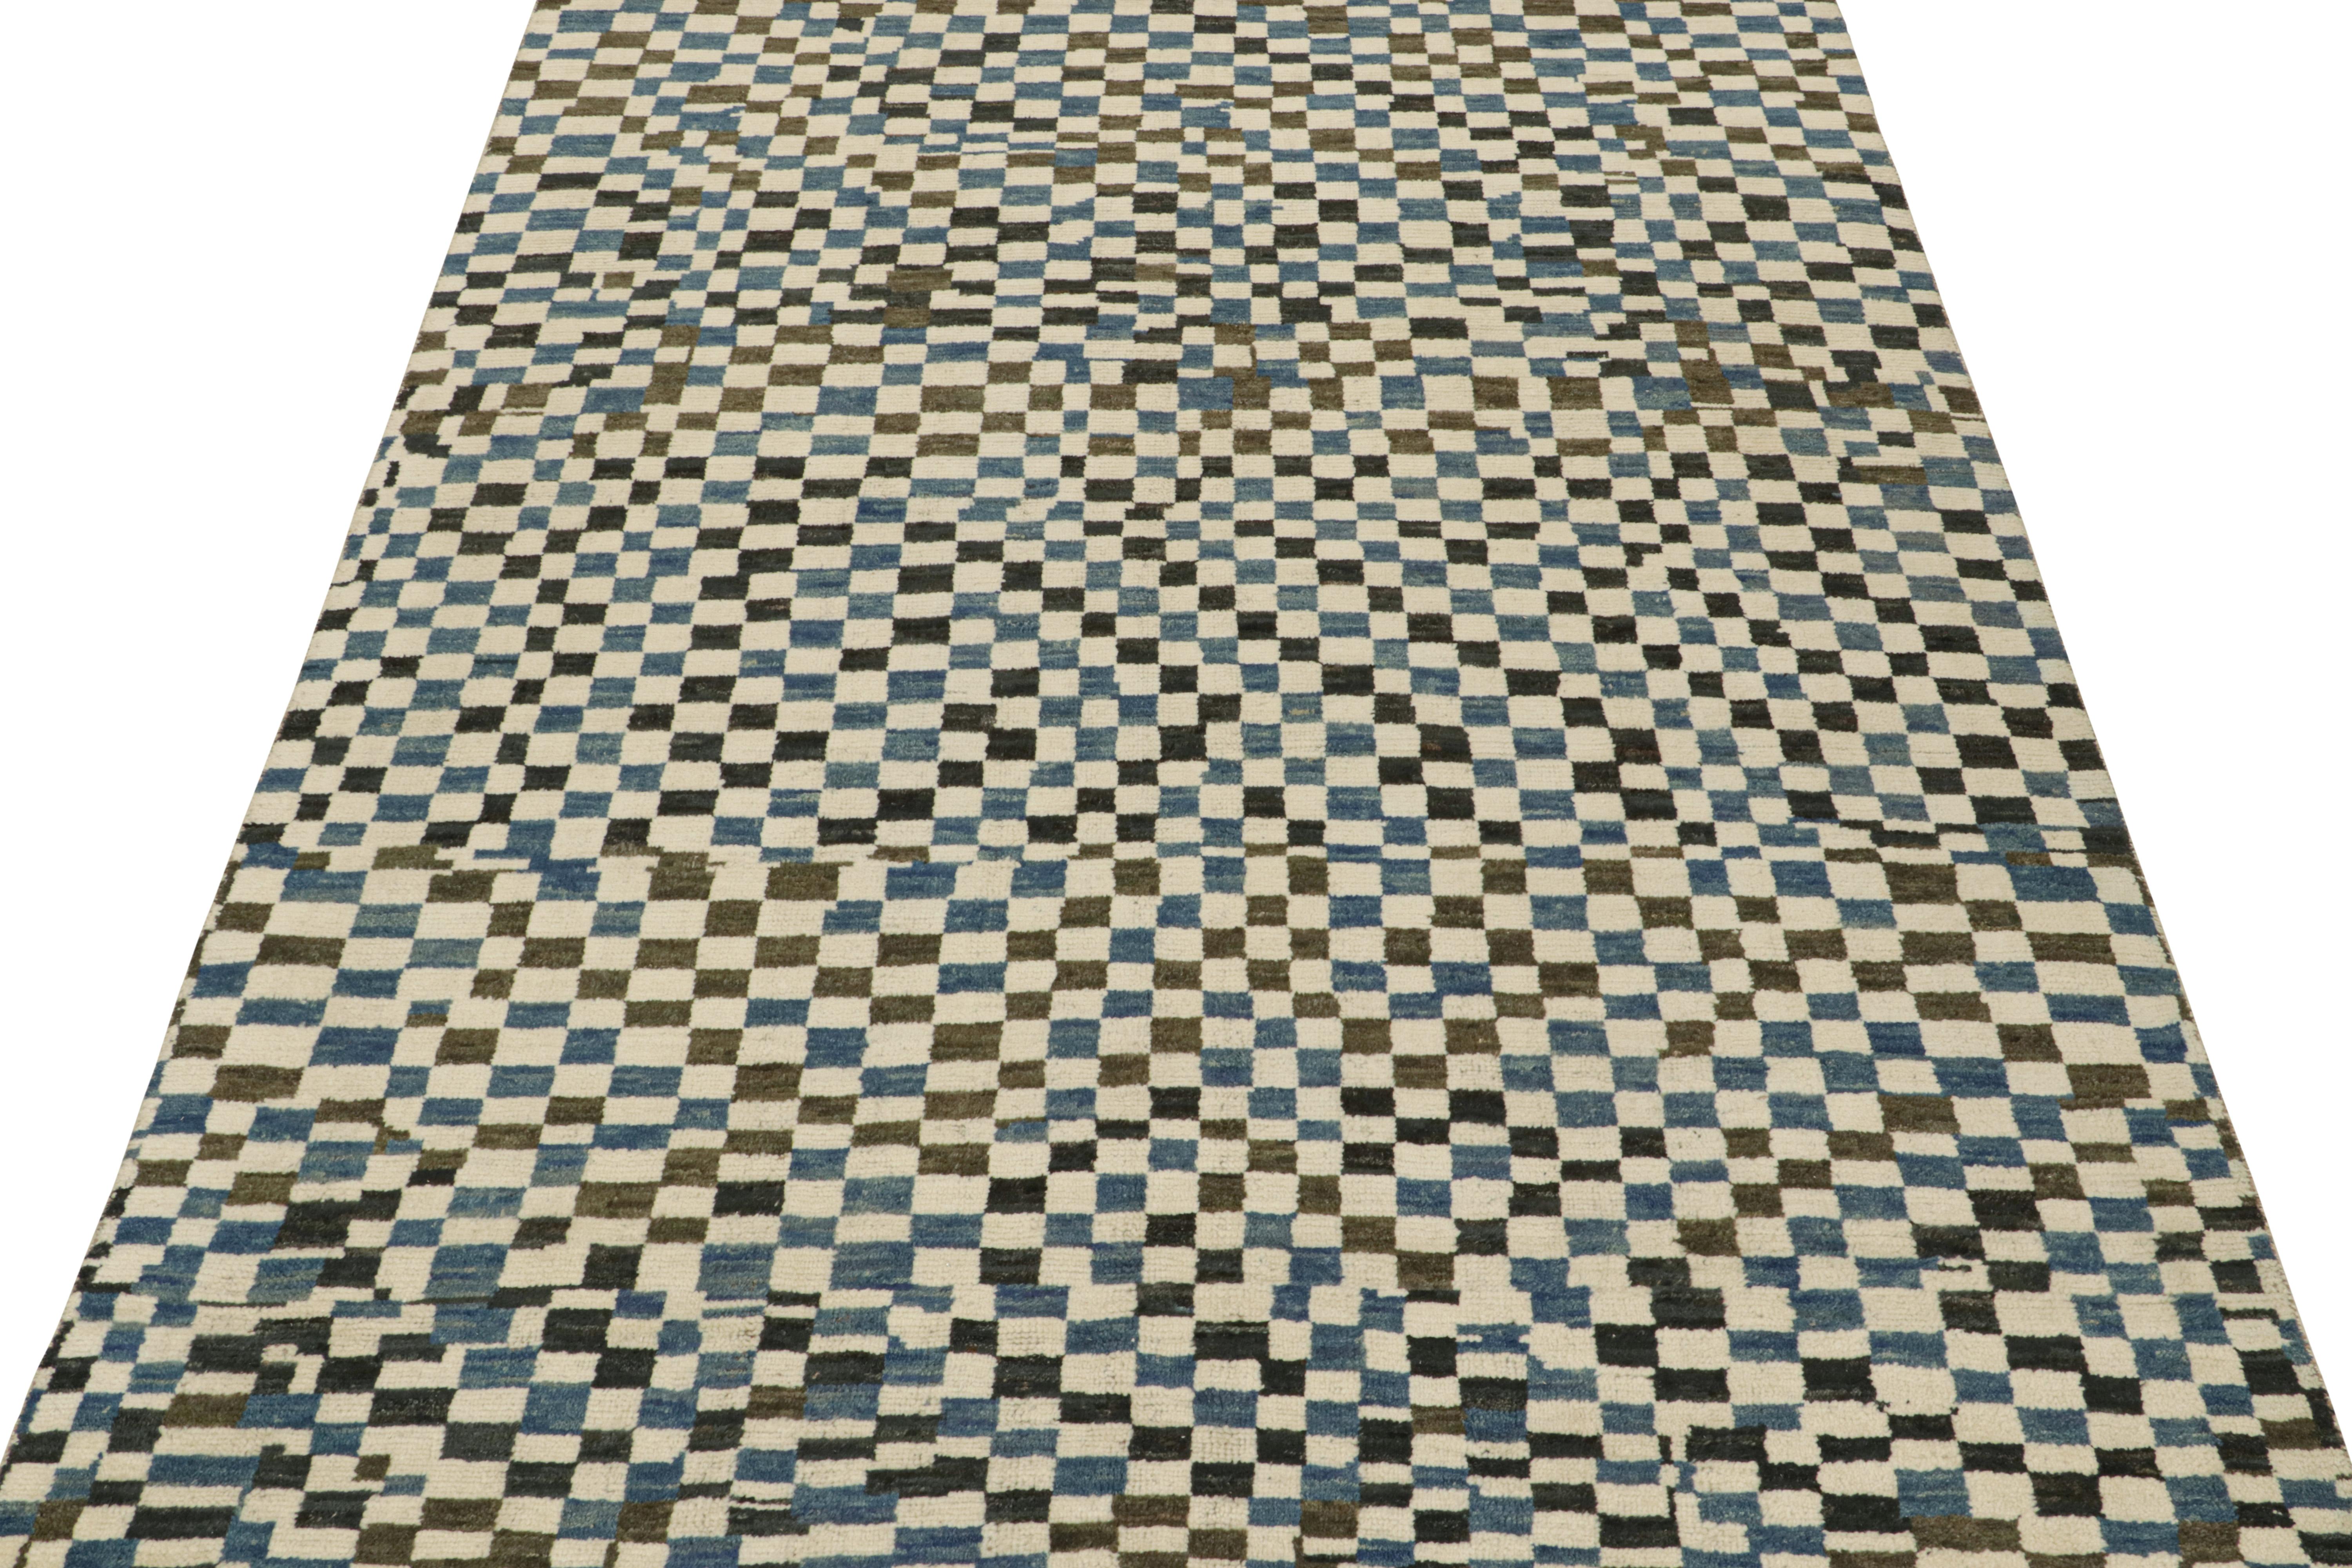 This 9x12 rug is a new addition to Rug & Kilim’s Moroccan rug collection. Hand-knotted in wool, its design recaptures the classic tribal sensibility in a new modern quality.

This particular design enjoys checkered patterns in tones of blue, dark